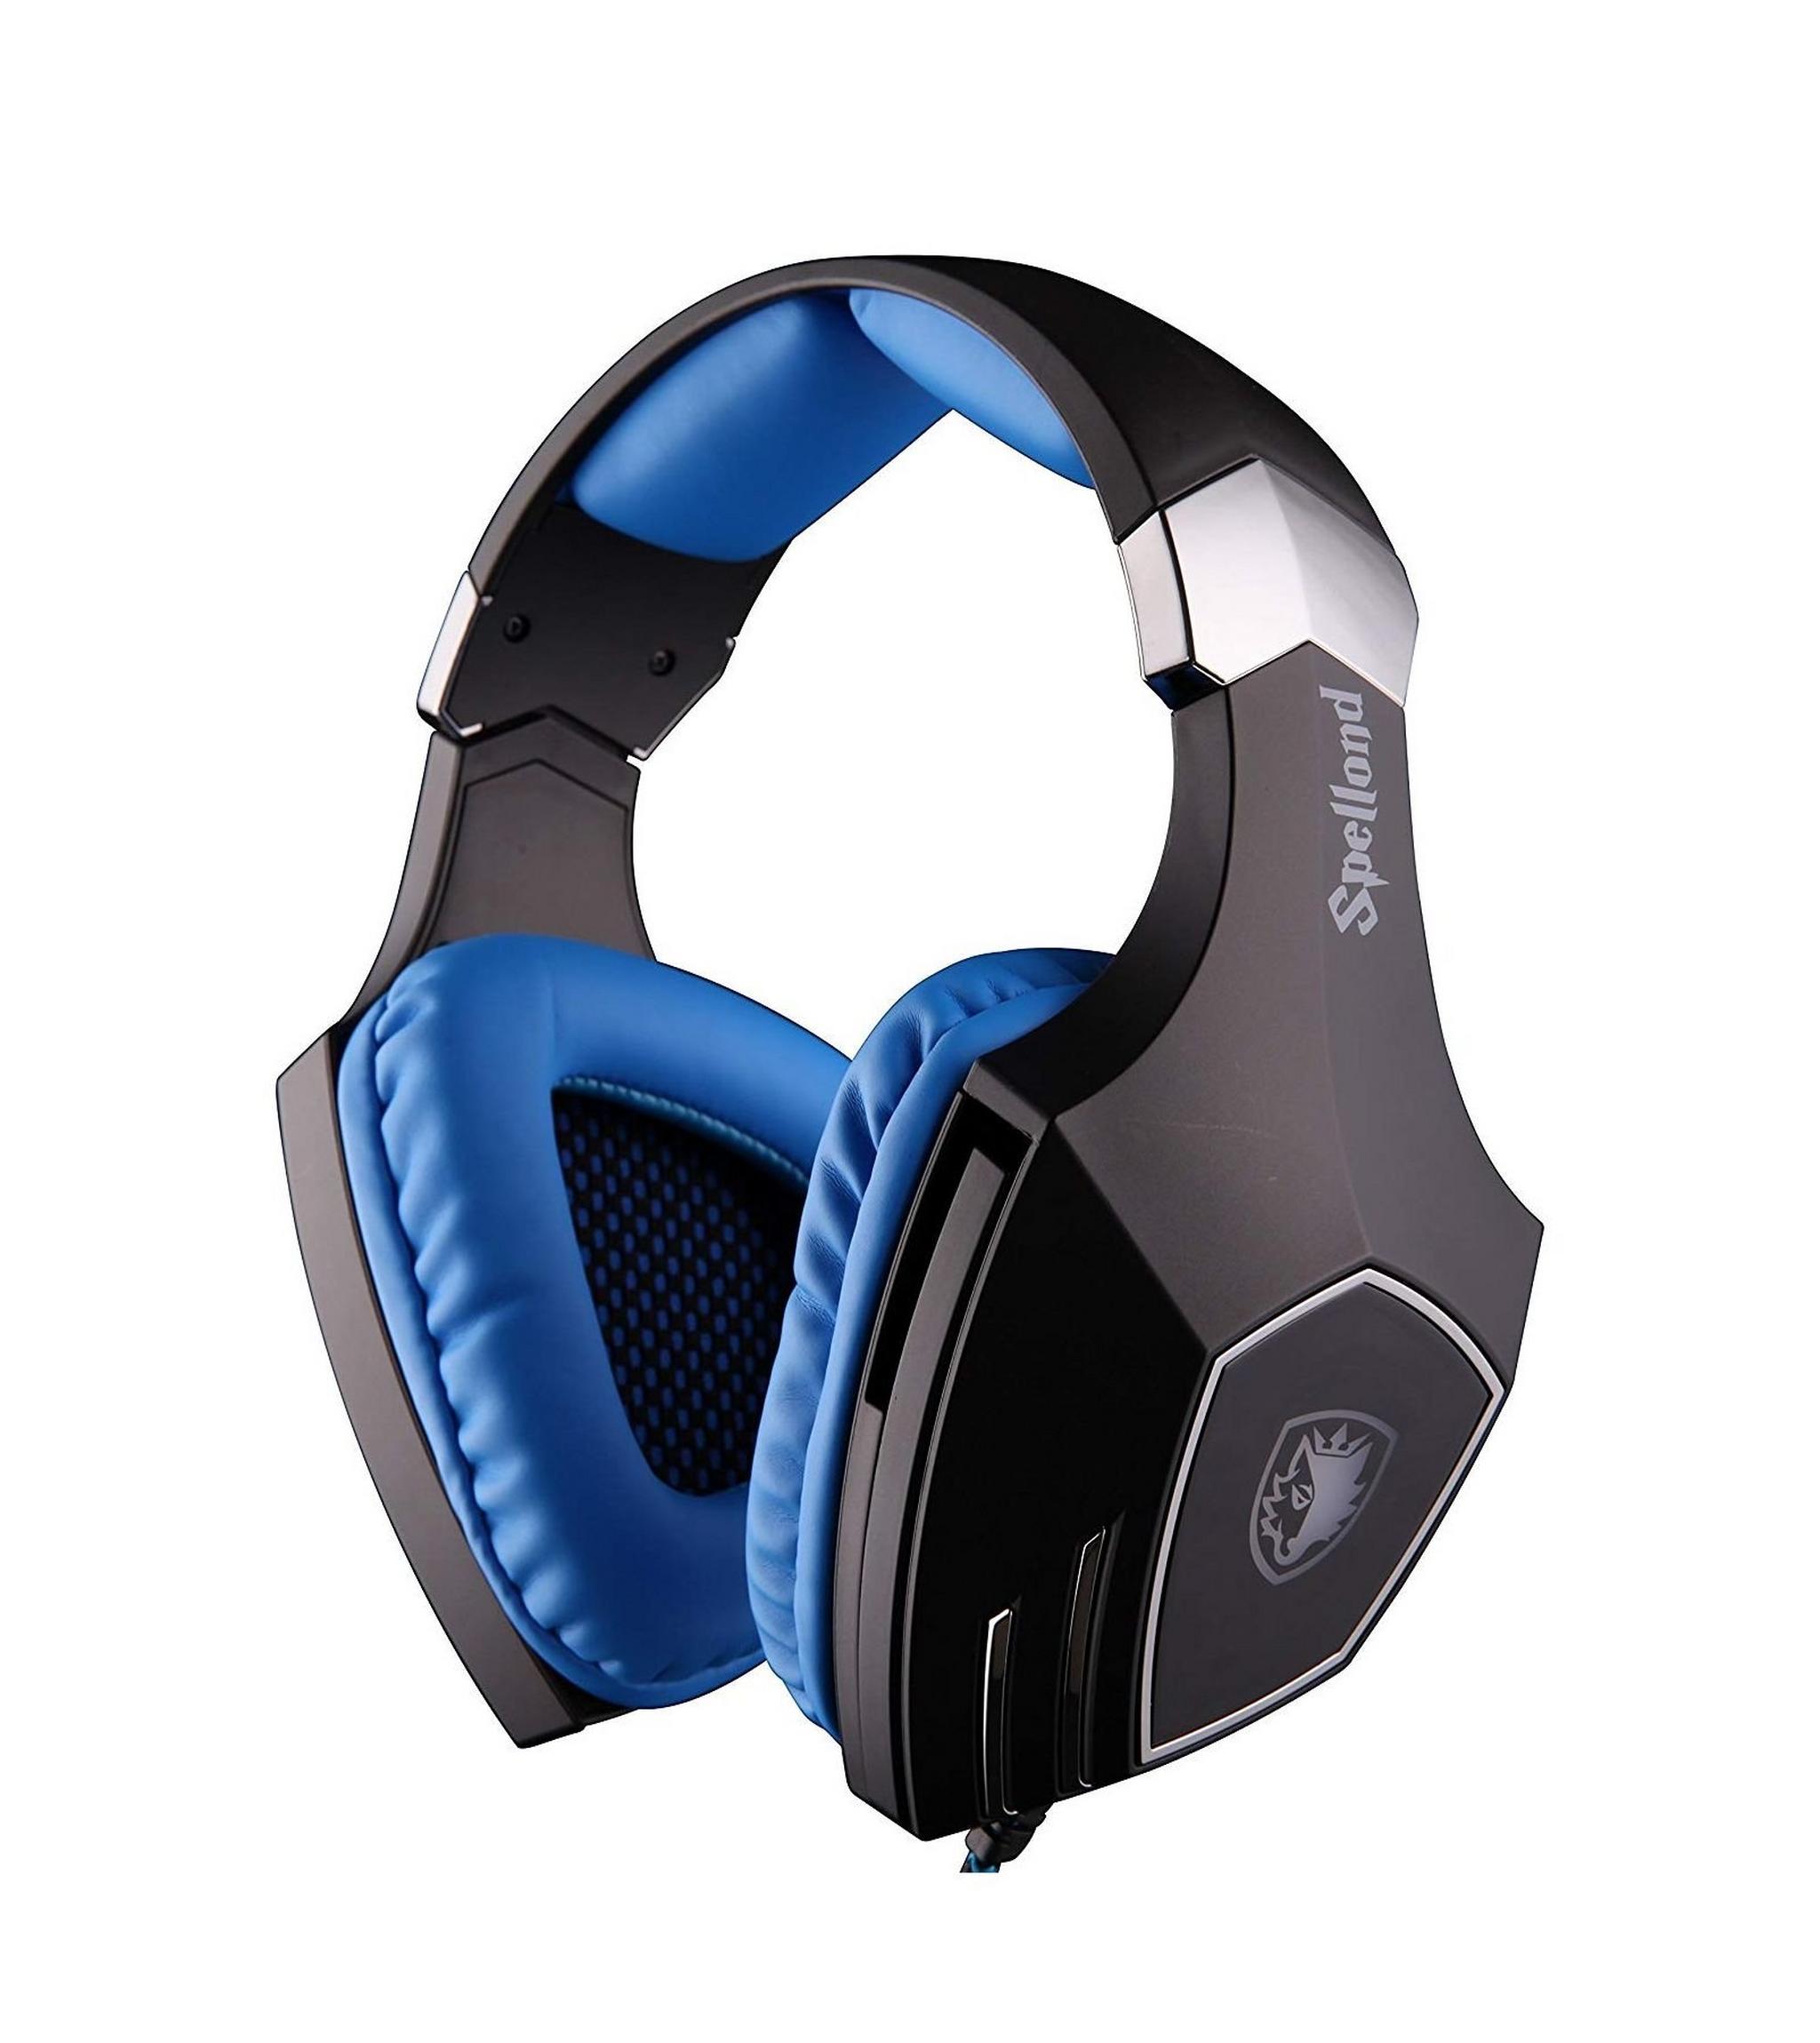 Sades SA-910 Spellond Pro Wired Gaming Headset